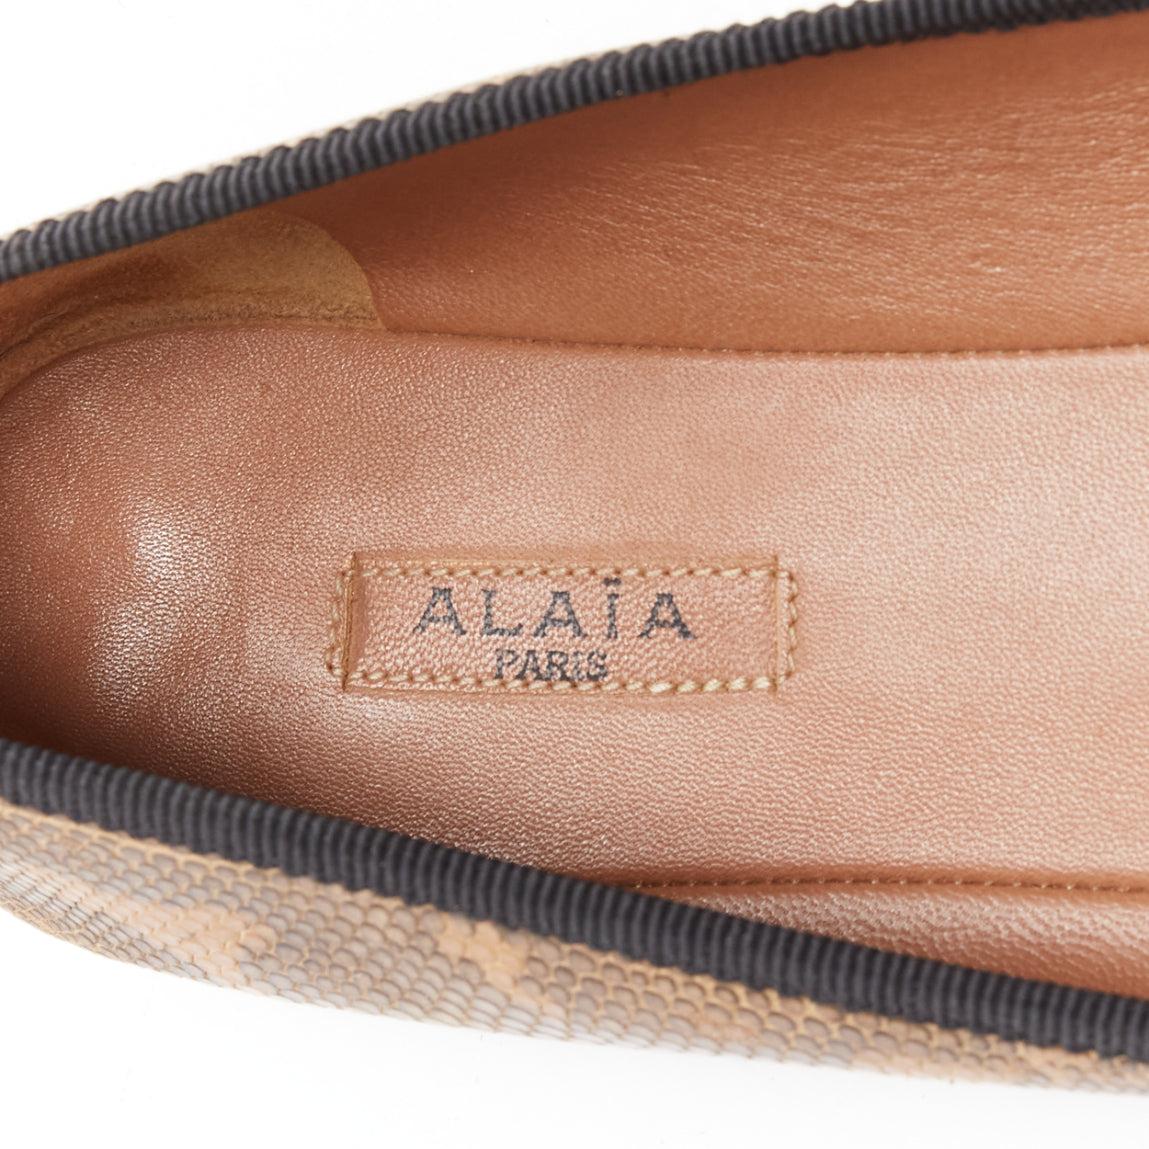 ALAIA brown scaled leather black bow trim ballerina flats shoes EU37 For Sale 4